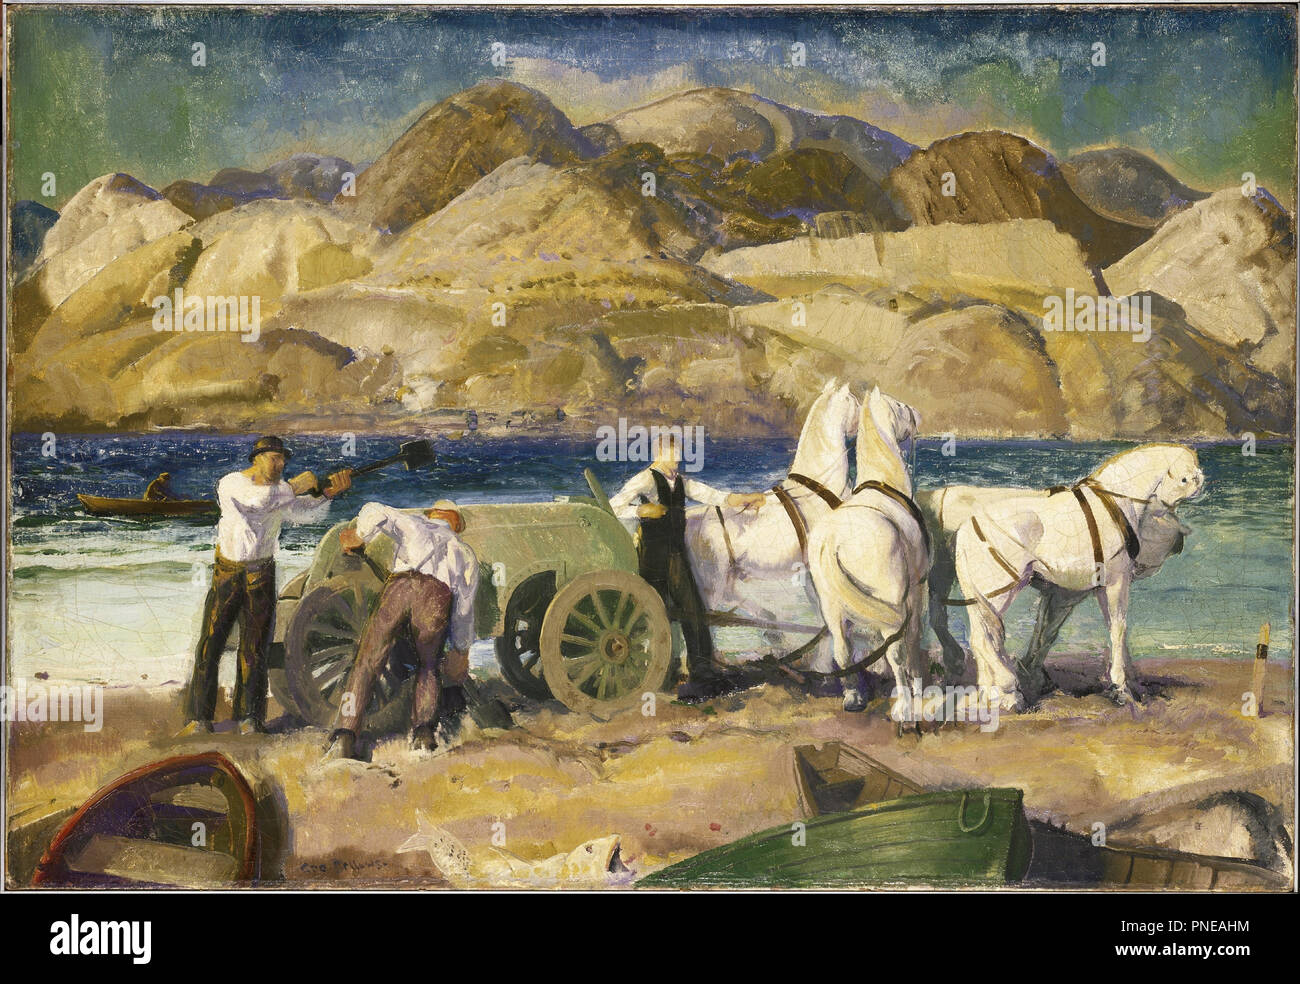 The Sand Cart. Date/Period: June 1917. Painting. Oil on canvas. Height: 76.8 cm (30.2 in); Width: 111.9 cm (44 in). Author: George Bellows. Bellows, George. Stock Photo